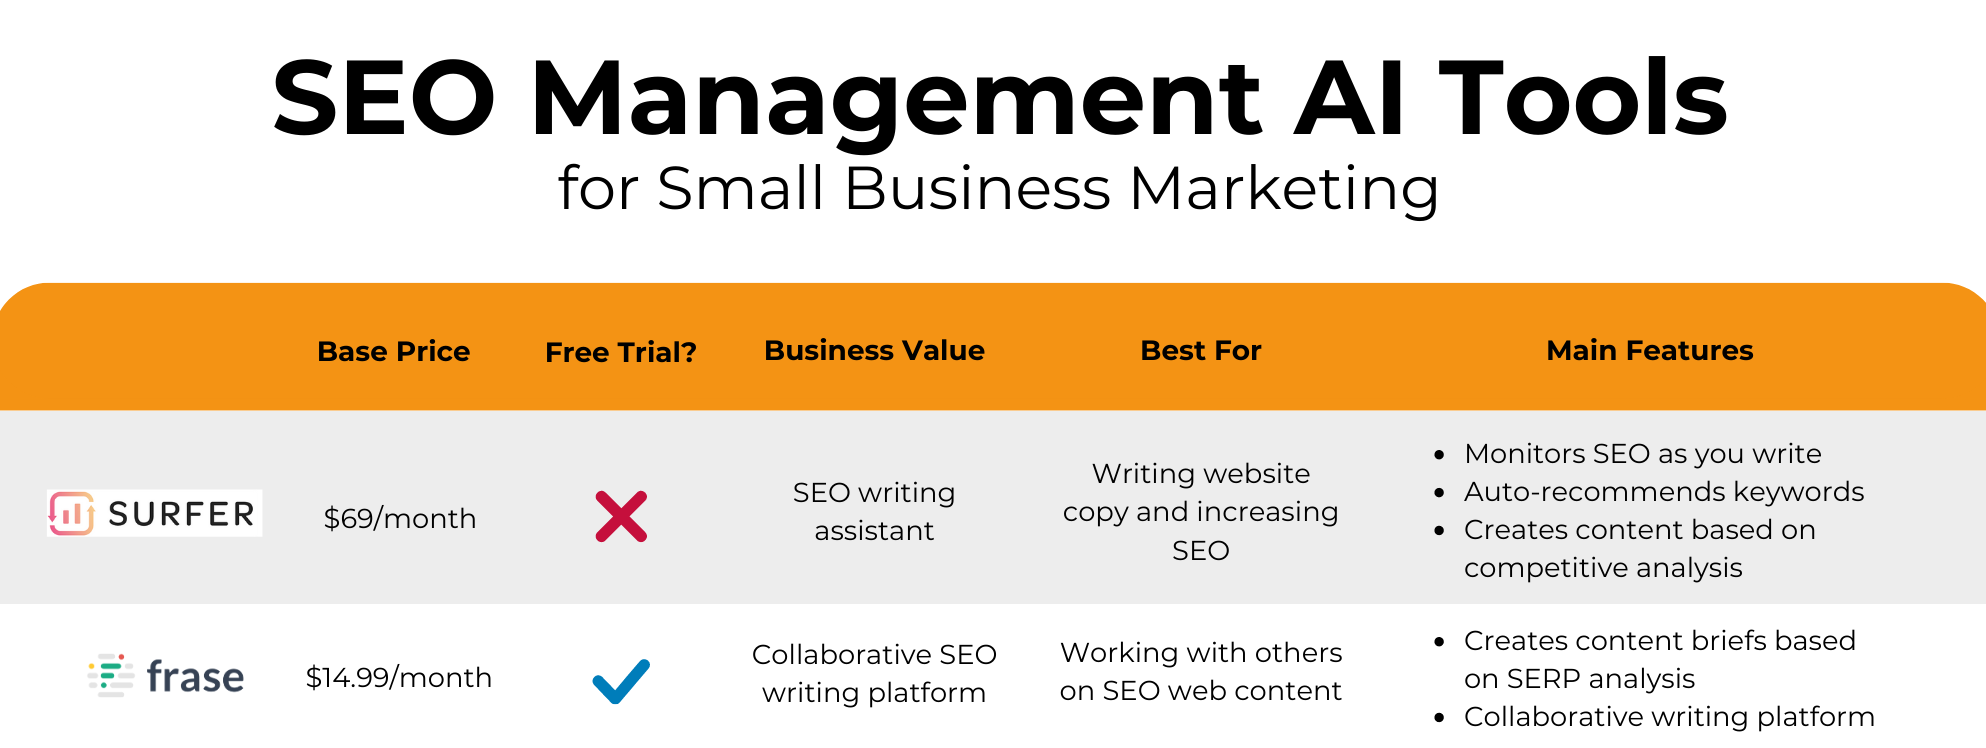 seo management ai tool chart recapping previously stated info in visual format